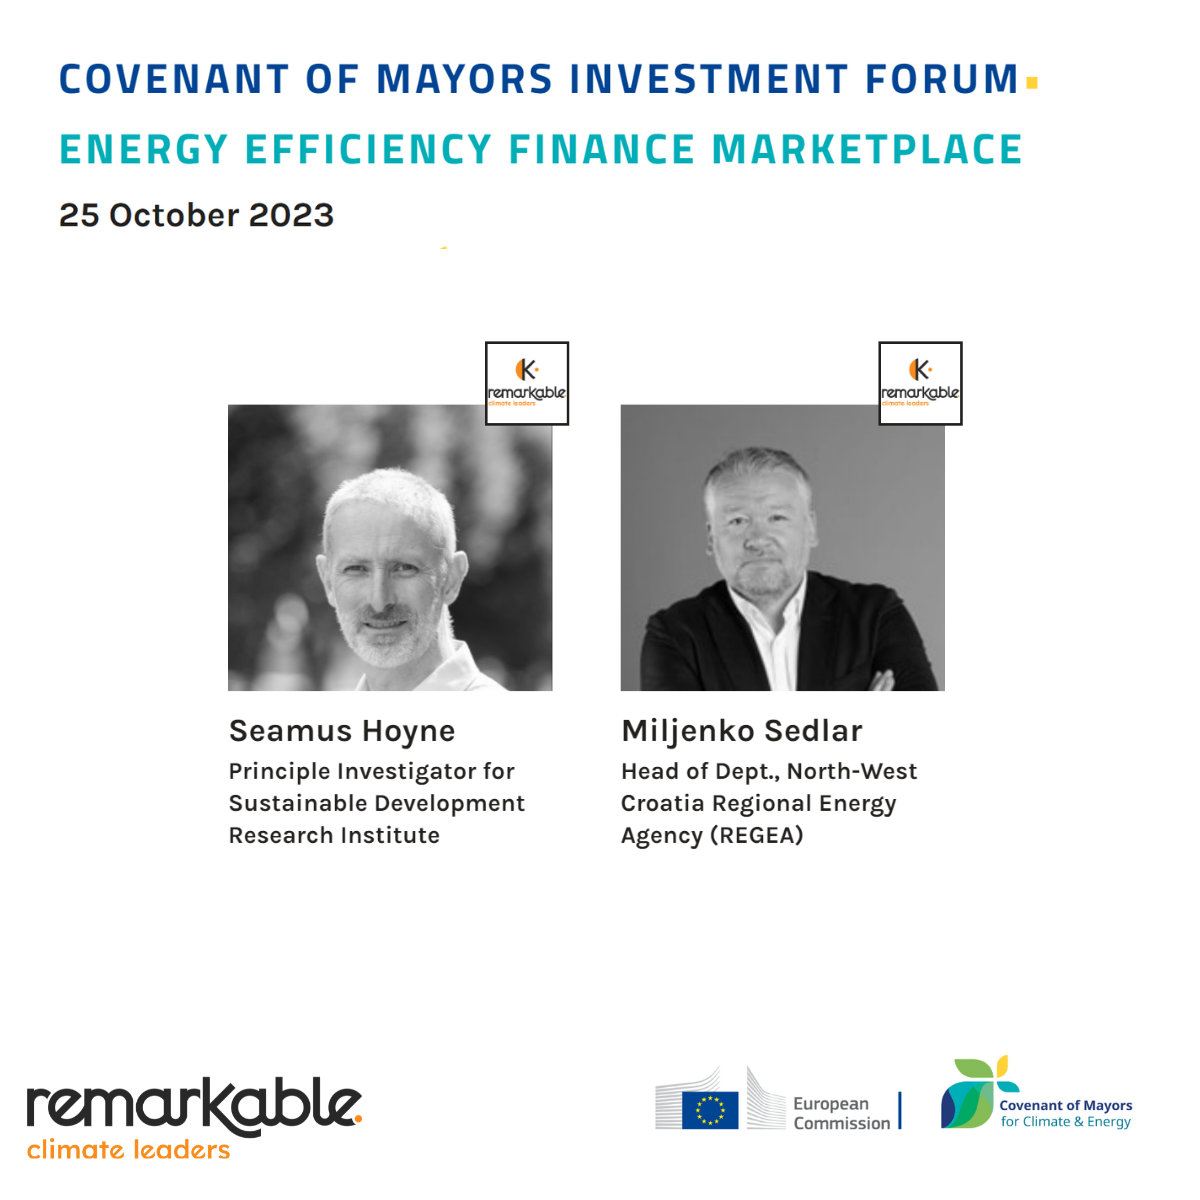 Meet REMARKABLE Climate Leaders at the Covenant of Mayors Investment Forum 2023